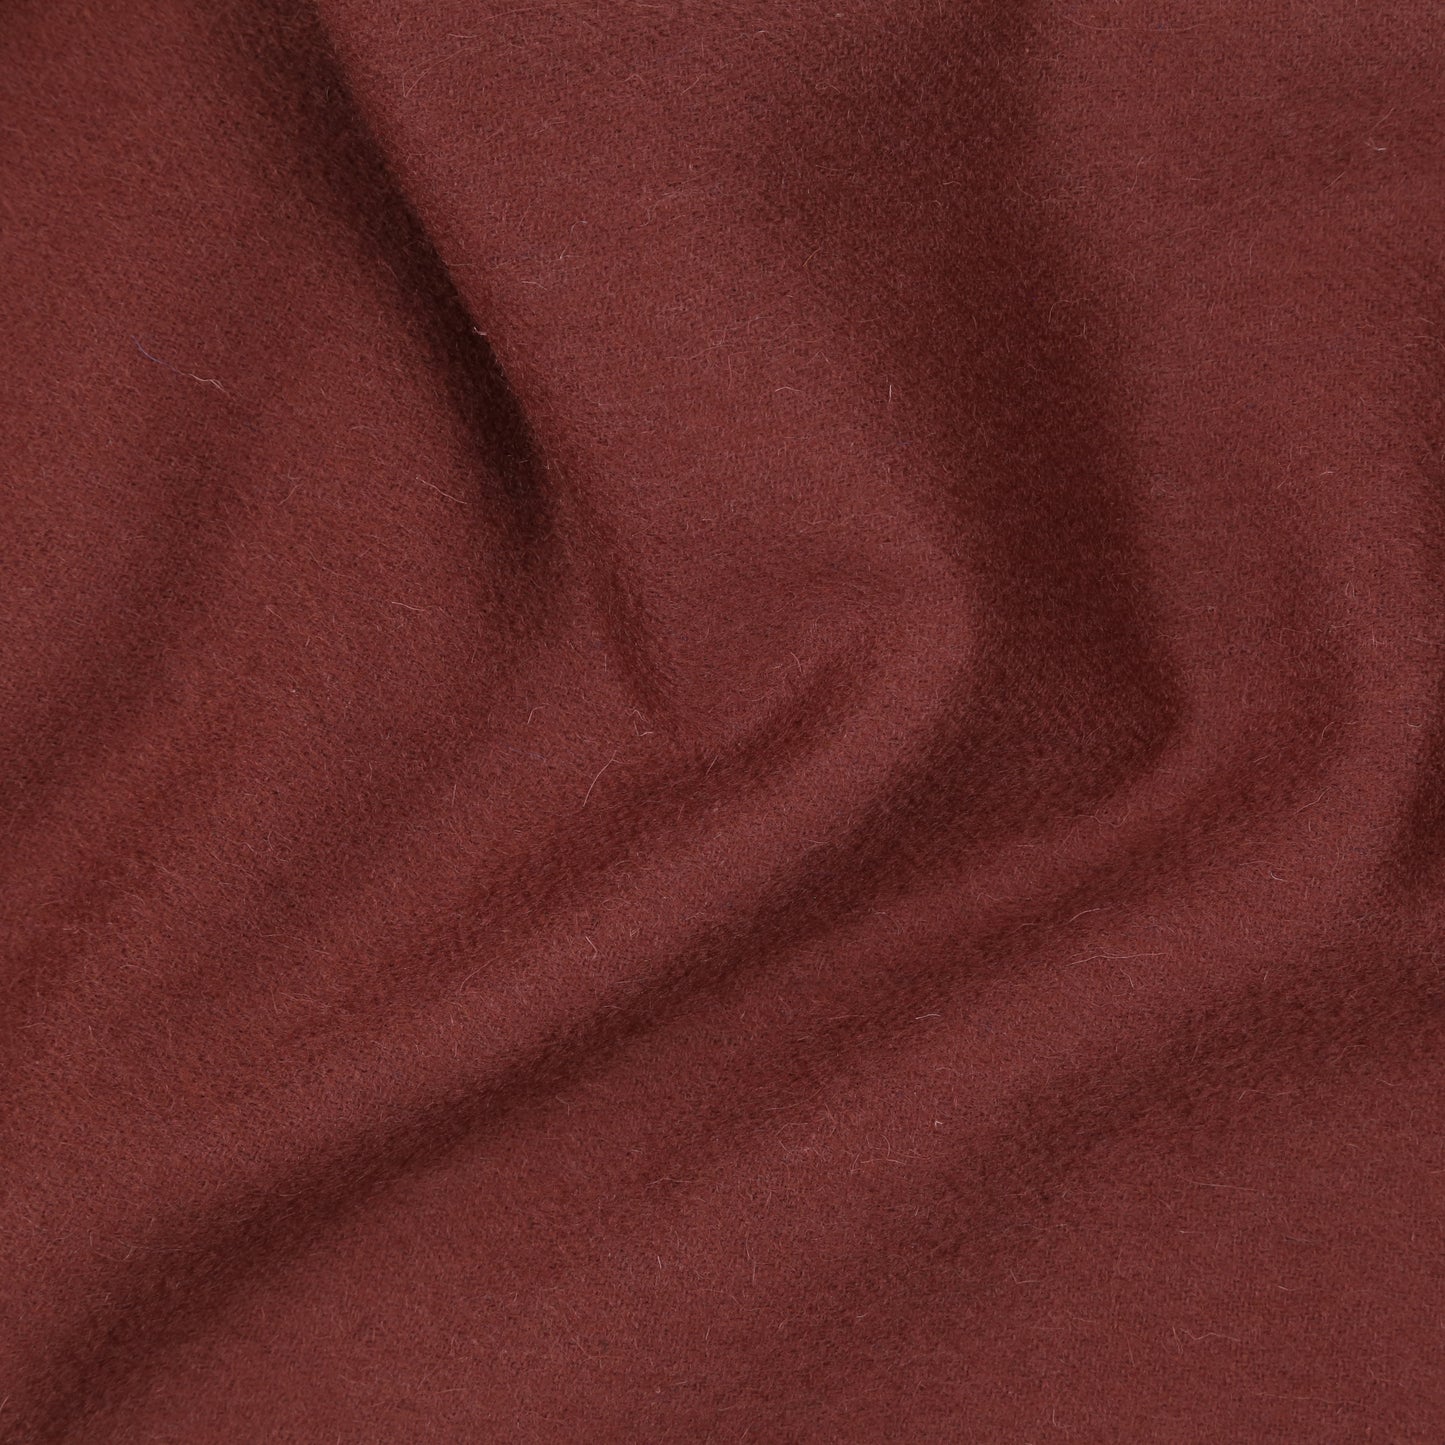 Rich Merlot Burgundy 100% Lambswool Long Scarf with Fringes